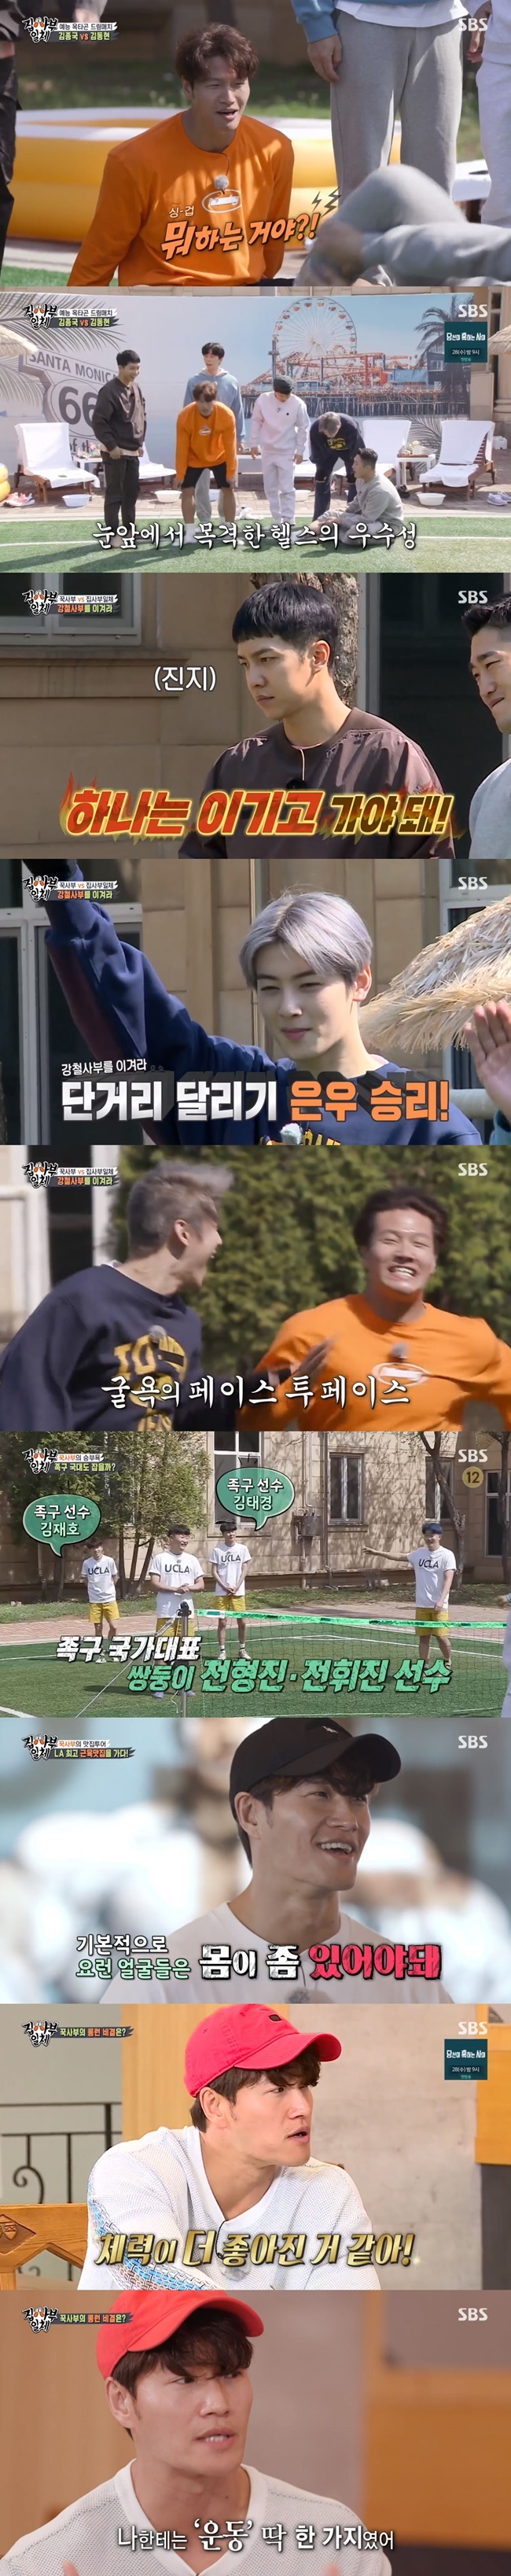 Kim Jong-kook humiliated his junior Cha Eun-woo.On April 25, SBS All The Butlers was held with a special vacation prepared by Master Kim Jong-kook.Kim Dong-Hyun and Kim Jong-kook held a revenge match with a leg fight that began last night from the morning.Kim Dong-Hyun, who was excited, was defeated again, shouting Wait a minute without suffering Yi Gi, and Yang Se-chan said, Dong Hyun is not much.Kim Dong-Hyun tried to re-enter the challenge, but was defeated again, and his disciples praised Lets do health.Lee Seung-gi said, Lets try to be a brother Yi Gi, he suggested. If we can stick behind Running Man, if we can not do anything, it will be shabby.The members, who decided that there was no chance of winning by force, suggested running, so Kim Jong-kook declared, The musclemen are not slow; I will show you the speed and muscle proportions.Cha Eun-woo provoked Lets win Running Man once.In the first Kyonggi, Cha Eun-woo and Kim Jong-kook faced off with a run.Lee Seung-gi cheered on Cha Eun-woo, saying one is Yi Gi and one has to go; Cha Eun-woo ran the vanguard and took the victory as the disciples expected.Cha Eun-woo showed off his composure, saying it was the last thing I controlled.Lee Seung-gi said, The best humiliating thing is that Jung Eun-woo ran looking at his brother.Its Running Man and I cant run, Yang Se-chan said.Kim Dong-Hyun said, Honestly, I think I will win too. Eventually, Game 3 was played by Kim Dong-Hyuns provocation.Kim Dong-Hyun said, My wife said that she should not lose her exercise even if she does not know anything else.However, Kim Dong-Hyun was defeated by Kim Jong-kook again, causing laughs.Among them, UCLA students appeared and suggested Jokgu.Kim Jong-kook, who started with leisure, began to push his disciples, saying, Do not be greedy, Do not try to be a hero, and Yi Gi.When Kim Jong-kook was overwhelmed with excessive fighting, the disciples watched Kyonggi and proceeded.With just one point left, the UCL team turned the ball down with a kick and took a light win.Their identity was Jokgu national twins Jeon Hyung Jin - Jokgu players including former Hwijin Kim Tae Kyung and Kim Jae Ho.Despite Kim Jong-kooks desperate request for a rematch, he was defeated repeatedly and Jokgus national team took the win.The next schedule of the disciples who finished Jokgu Kyonggi was Master Kim Jong-kooks muscle-schulin guide; Yang Se-hyeong said, My body is not yet compromised with me.My body wants to go to a PC room. I do not have any idea of ​​exercise. I was persuaded once, but when I saw it, he was lying.Kim Jong-kook replied, Lets get married. If you lie, you should get more.Yang Se-hyeong was embarrassed by Why is someone else in charge but Kim Jong-kook led Yang Se-hyeong to the world of muscles.